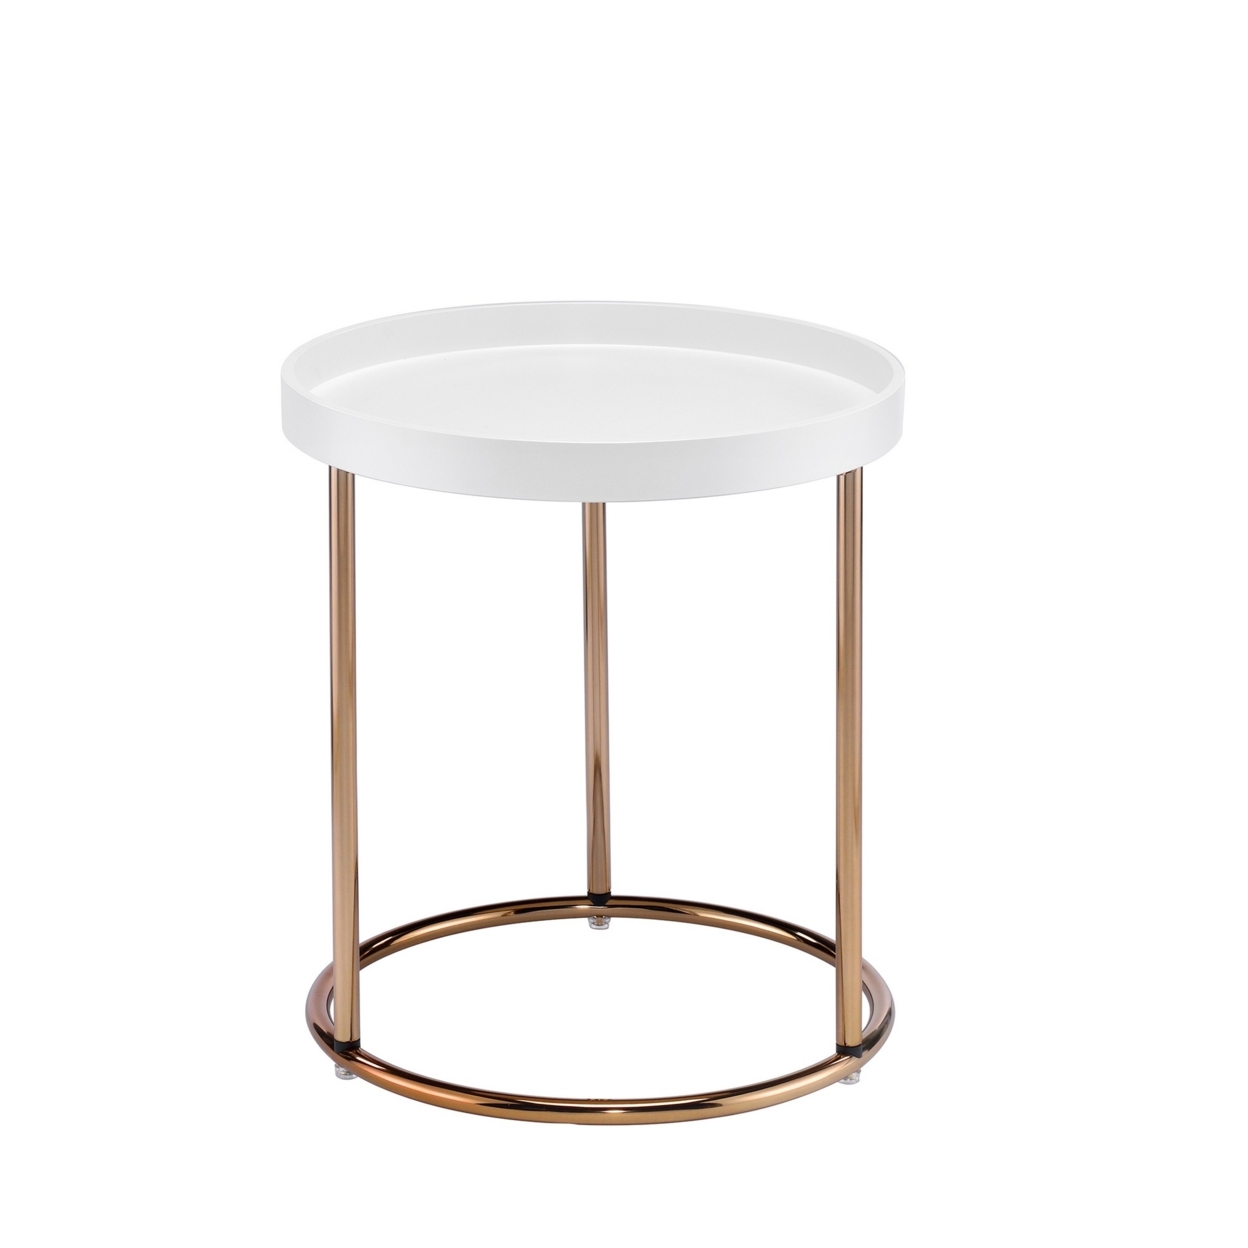 21.75 Inches Wooden Lipped Edge Side Table With Metal Legs, White- Saltoro Sherpi